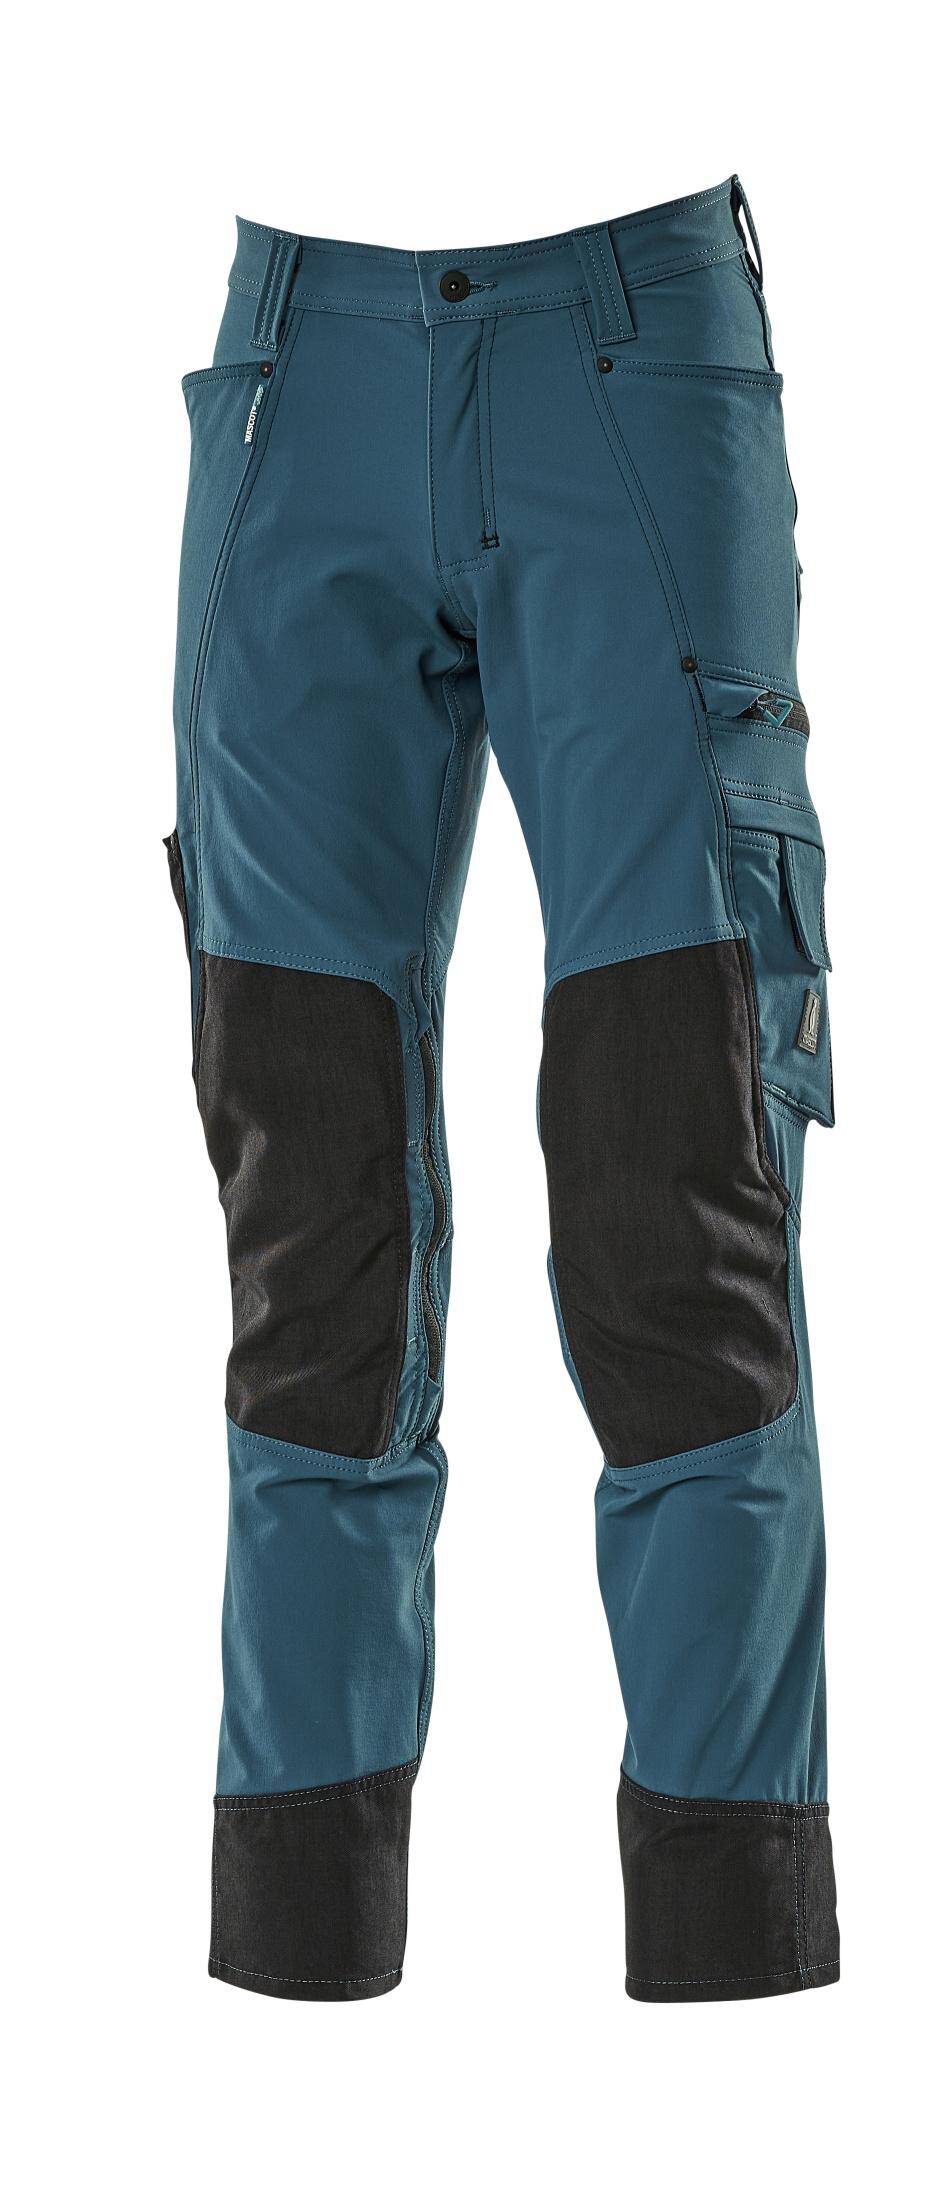 Trousers with kneepad pockets Advanced blue